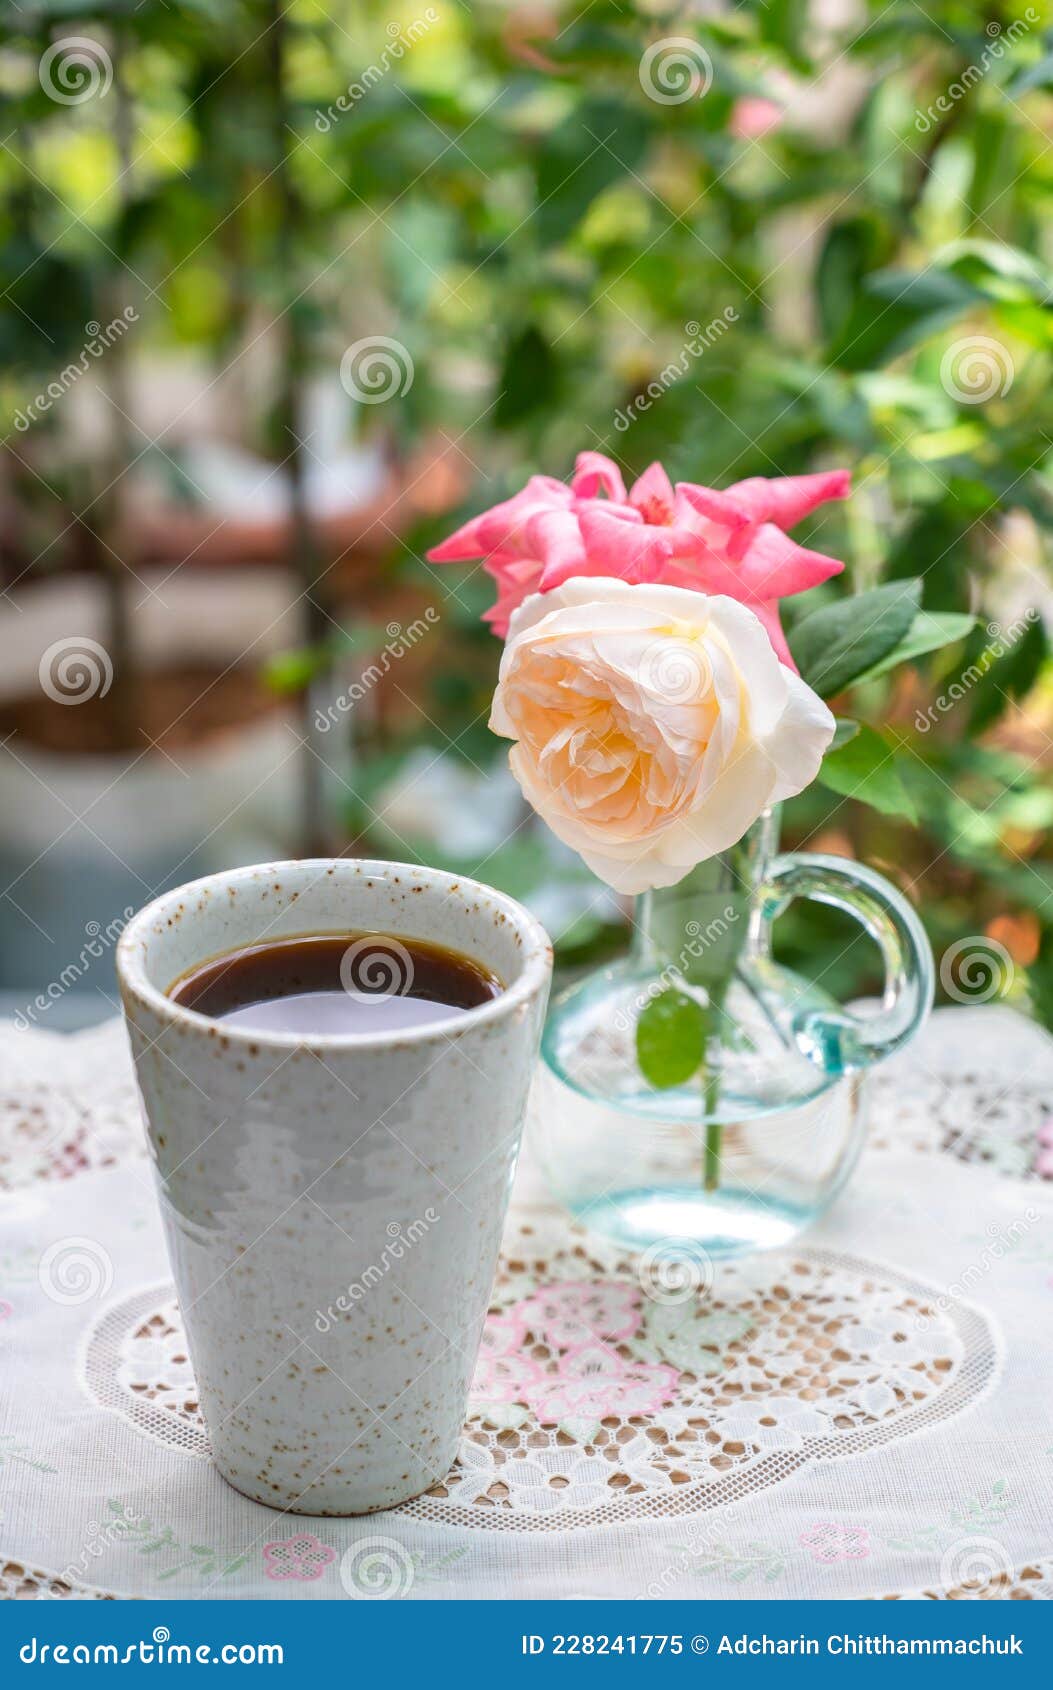 Romantic Morning. Relaxing Moment with a Cup of Coffee on a Table ...